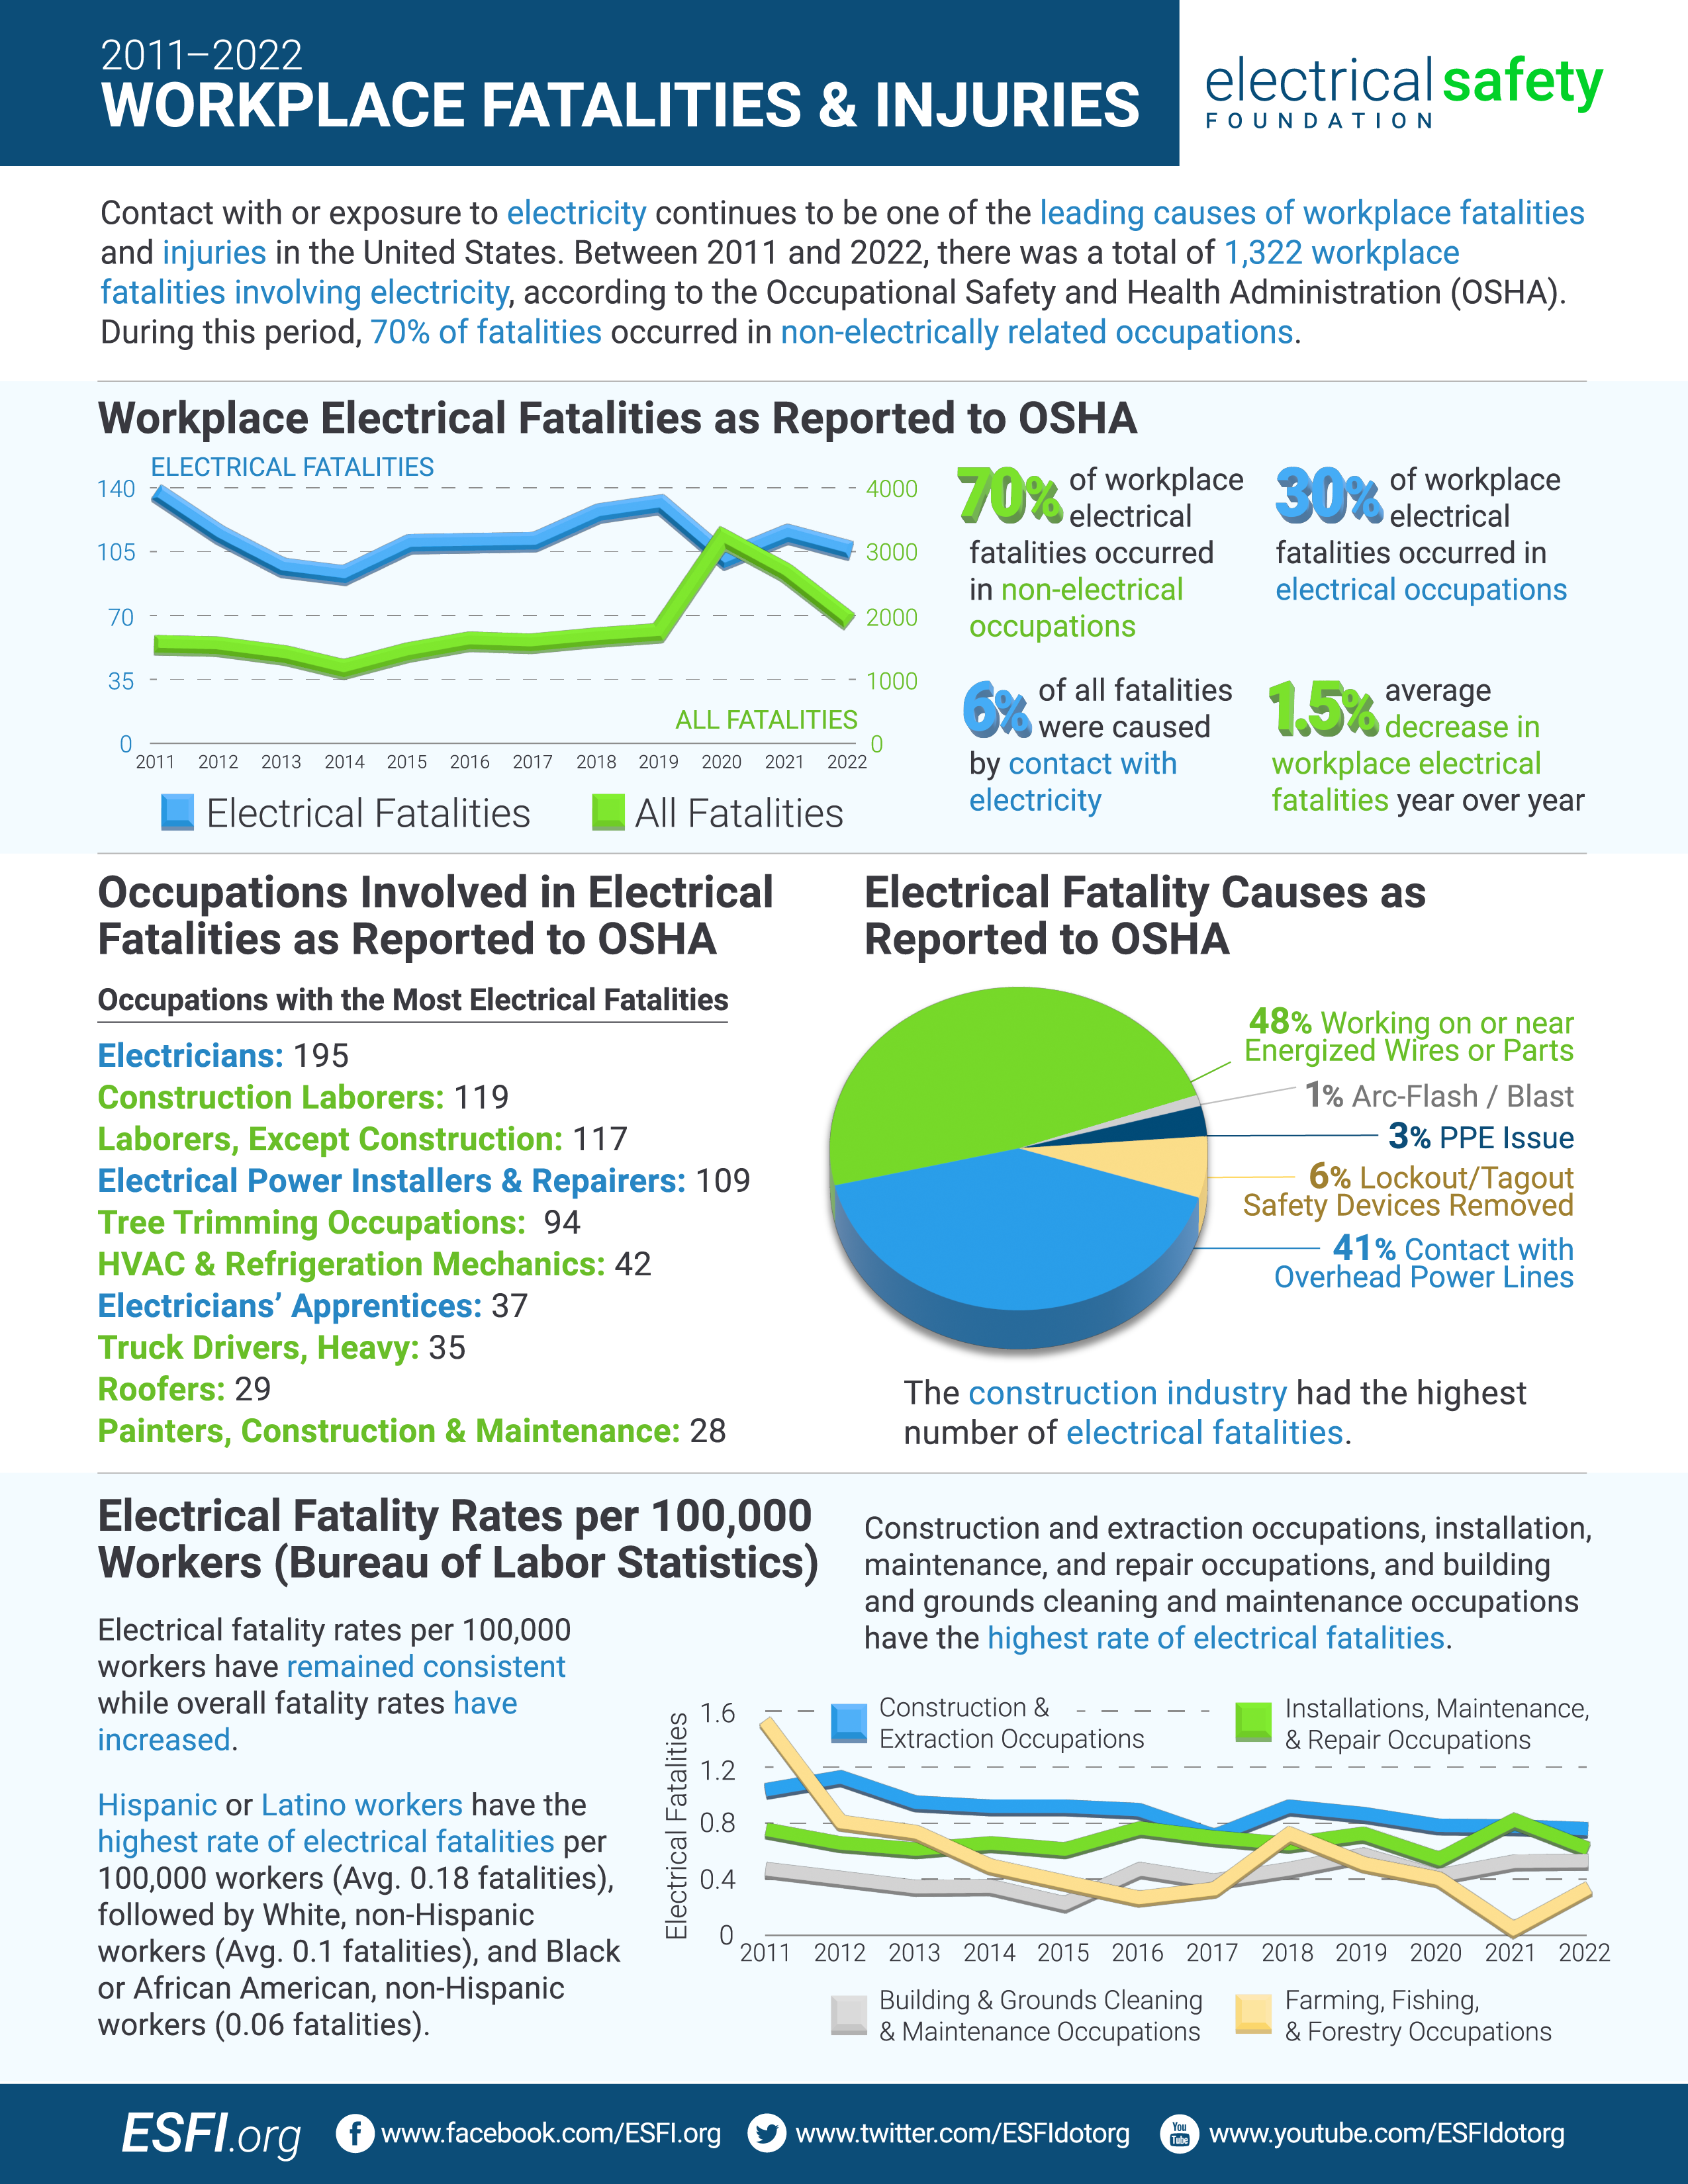 Electrical Fatalities in the Workplace: 2011 – 2022